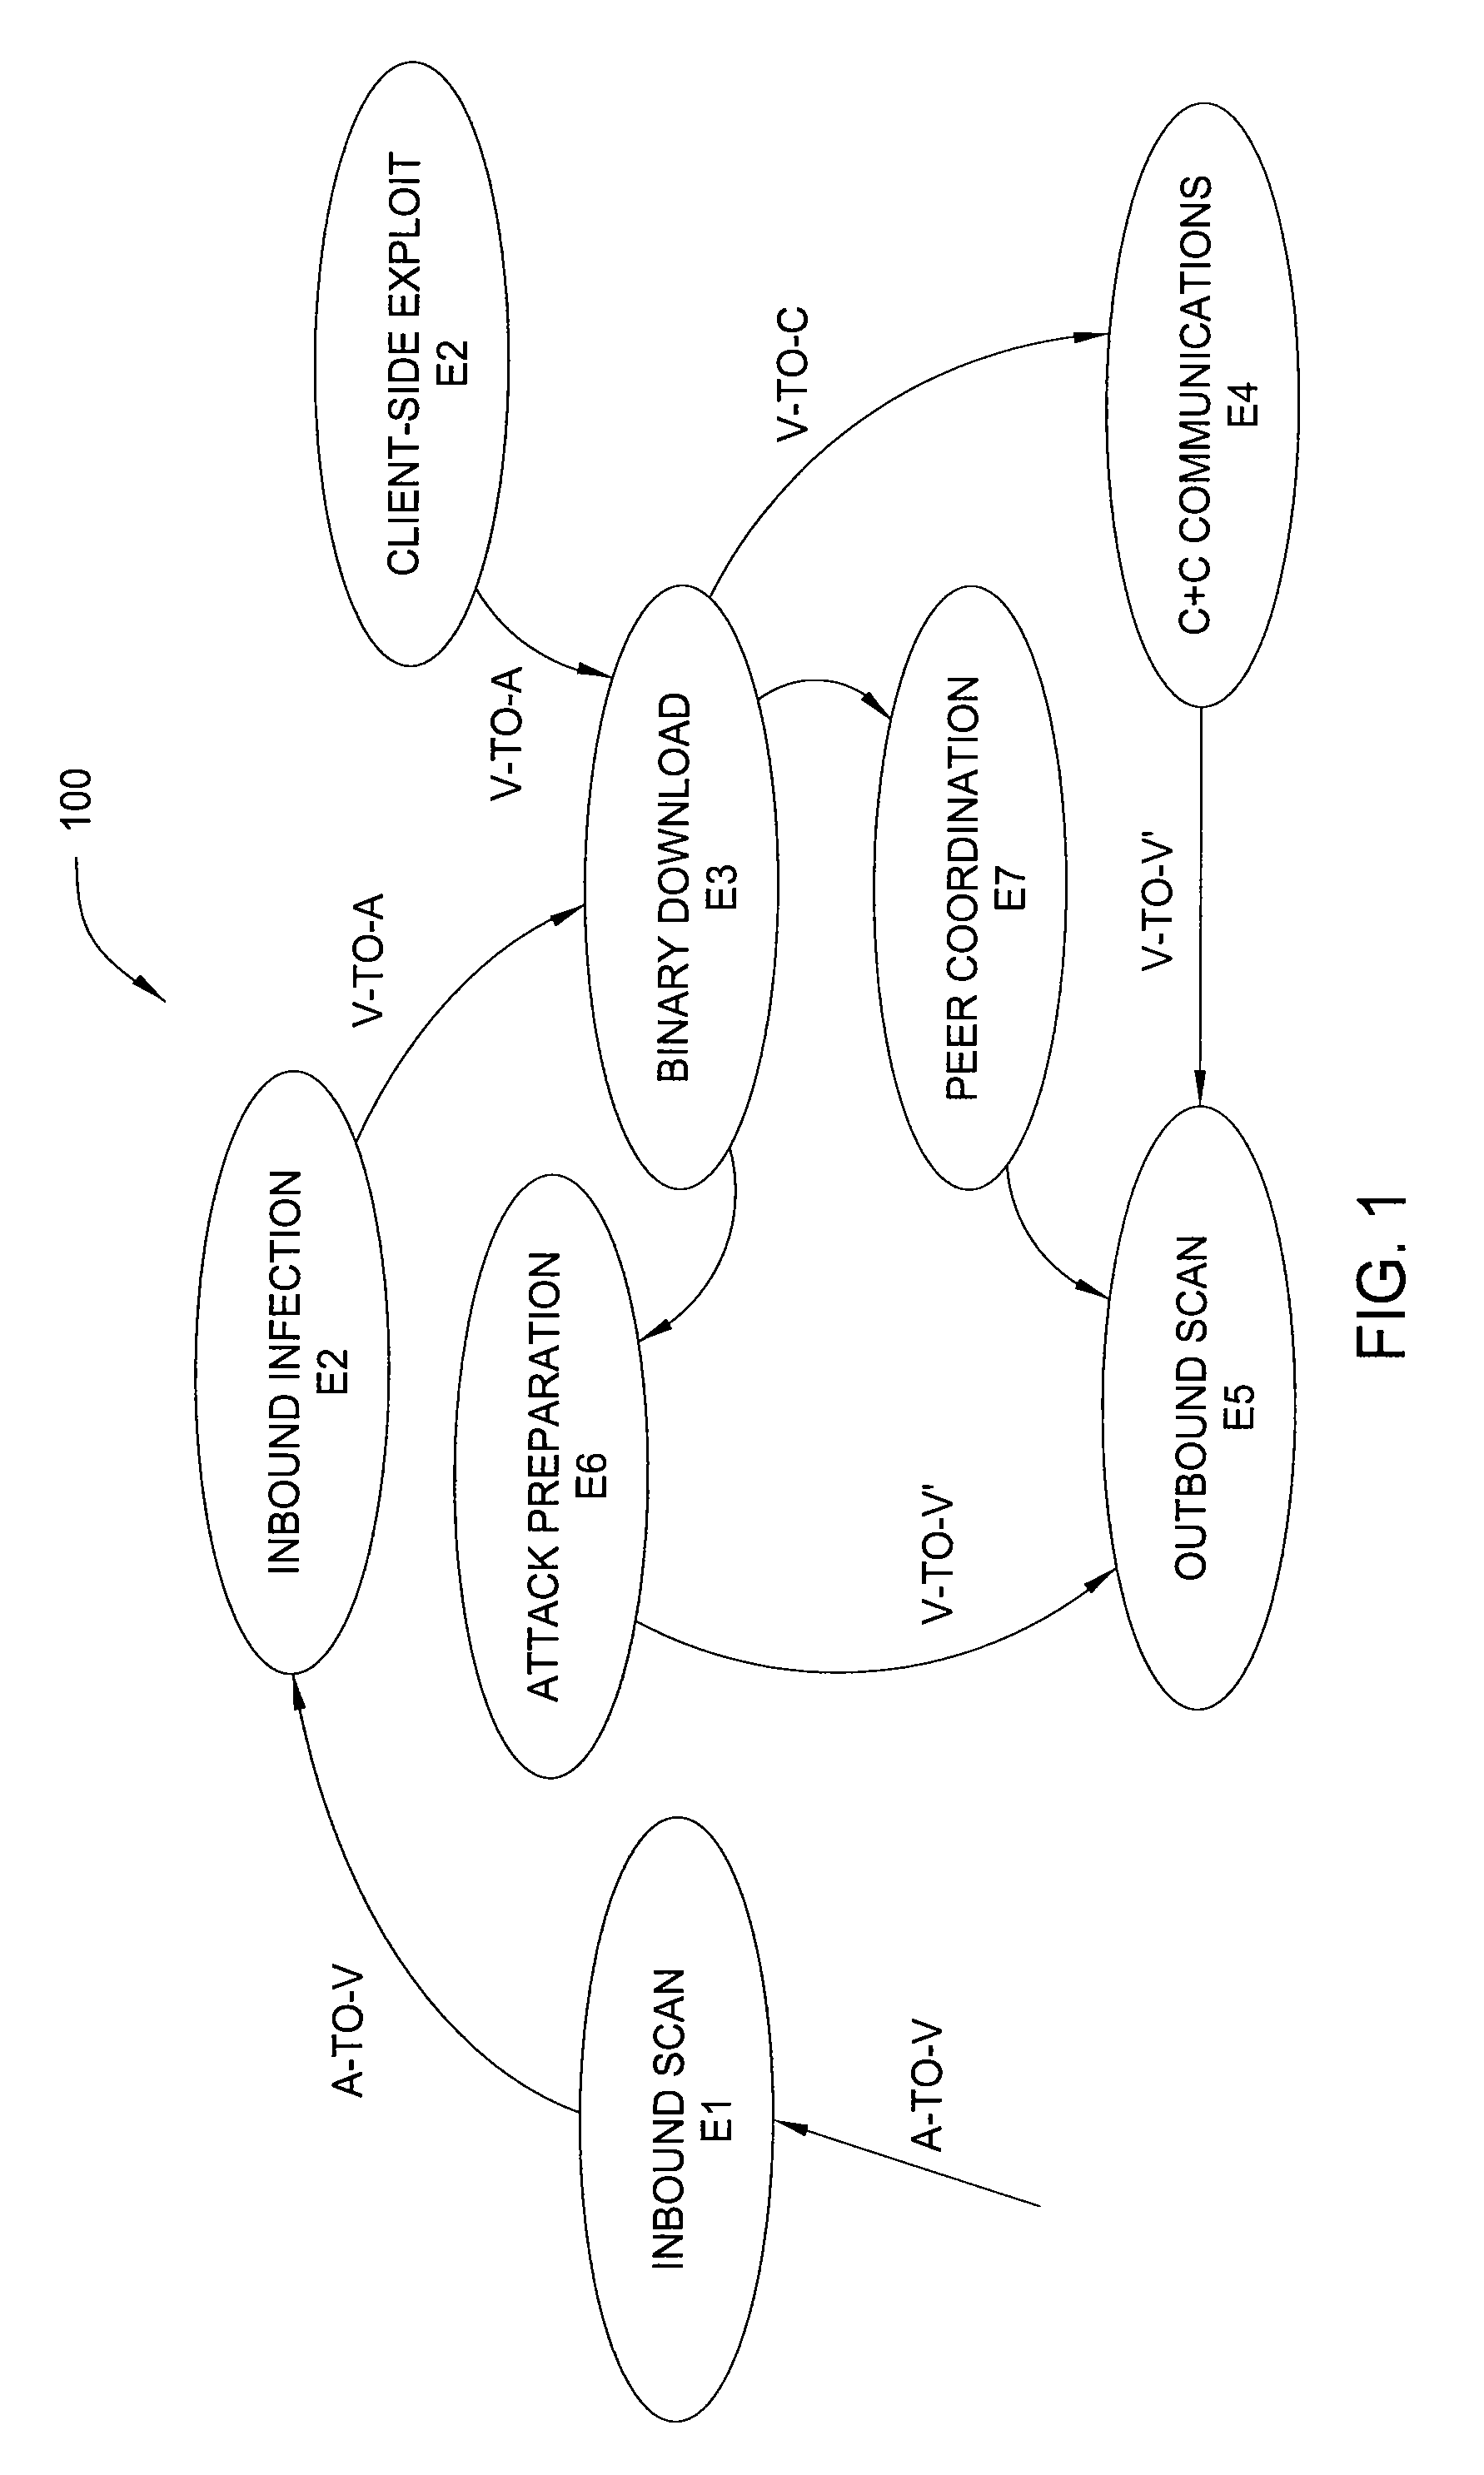 Method and apparatus for detecting malware infection